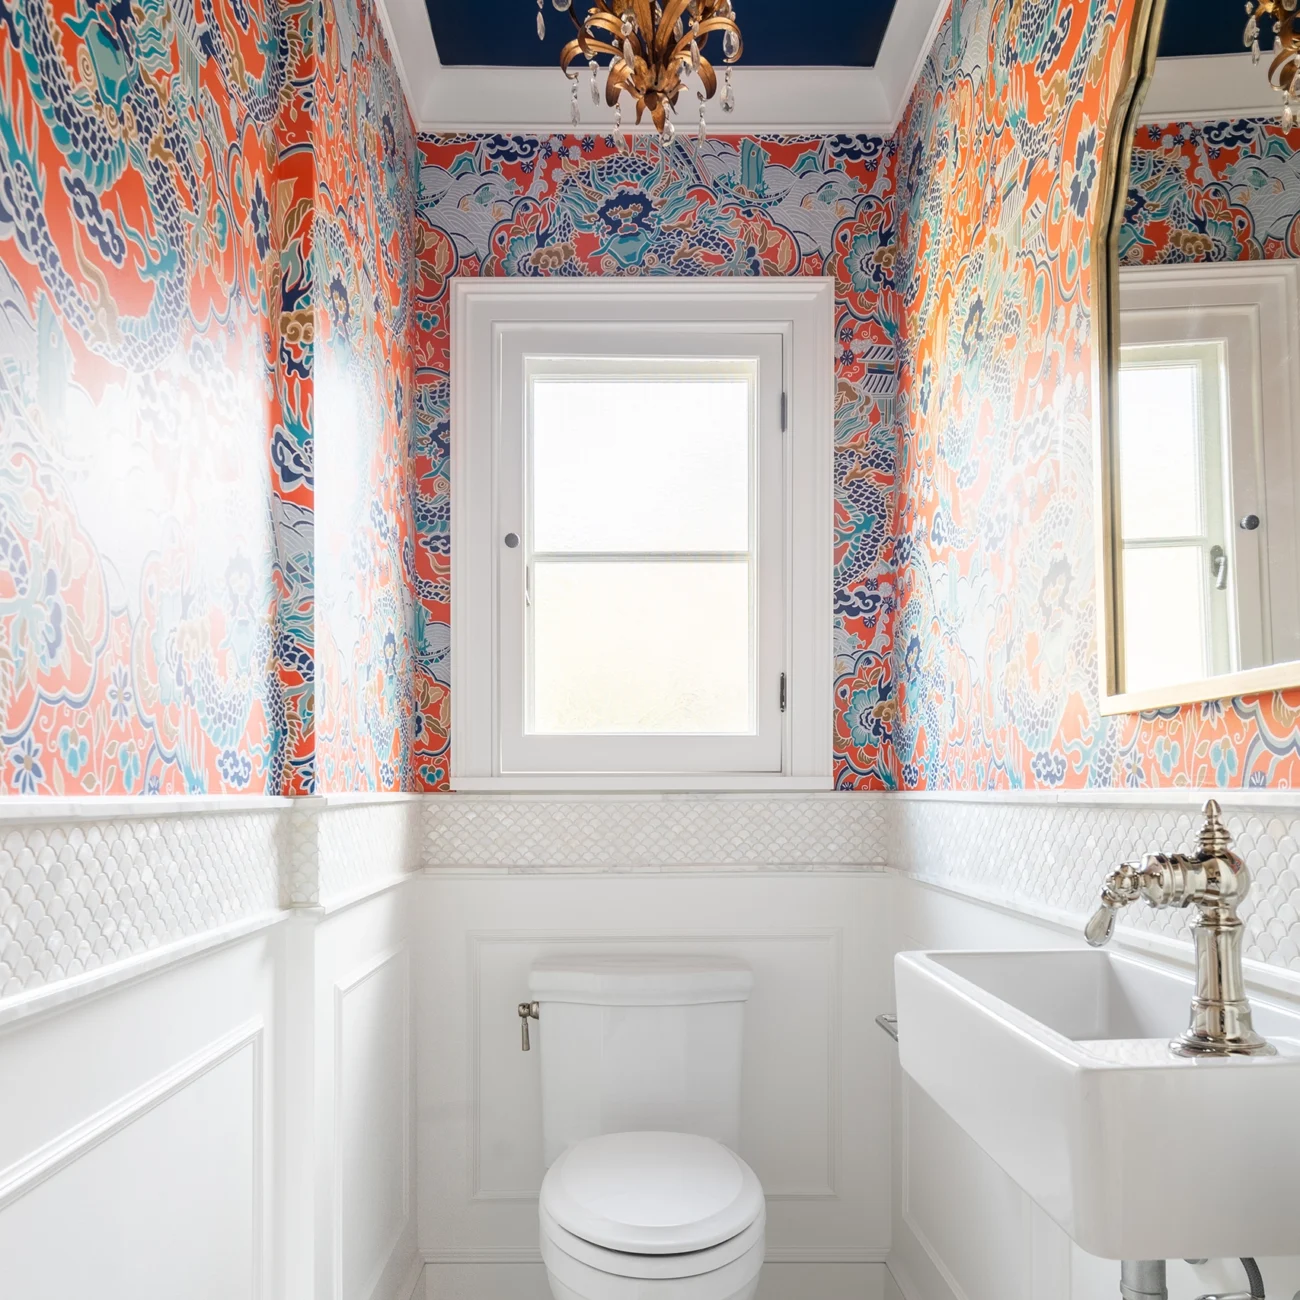 Christine Vroom Interiors | Via-Arriba | Brightly colored dining powder room with chandelier